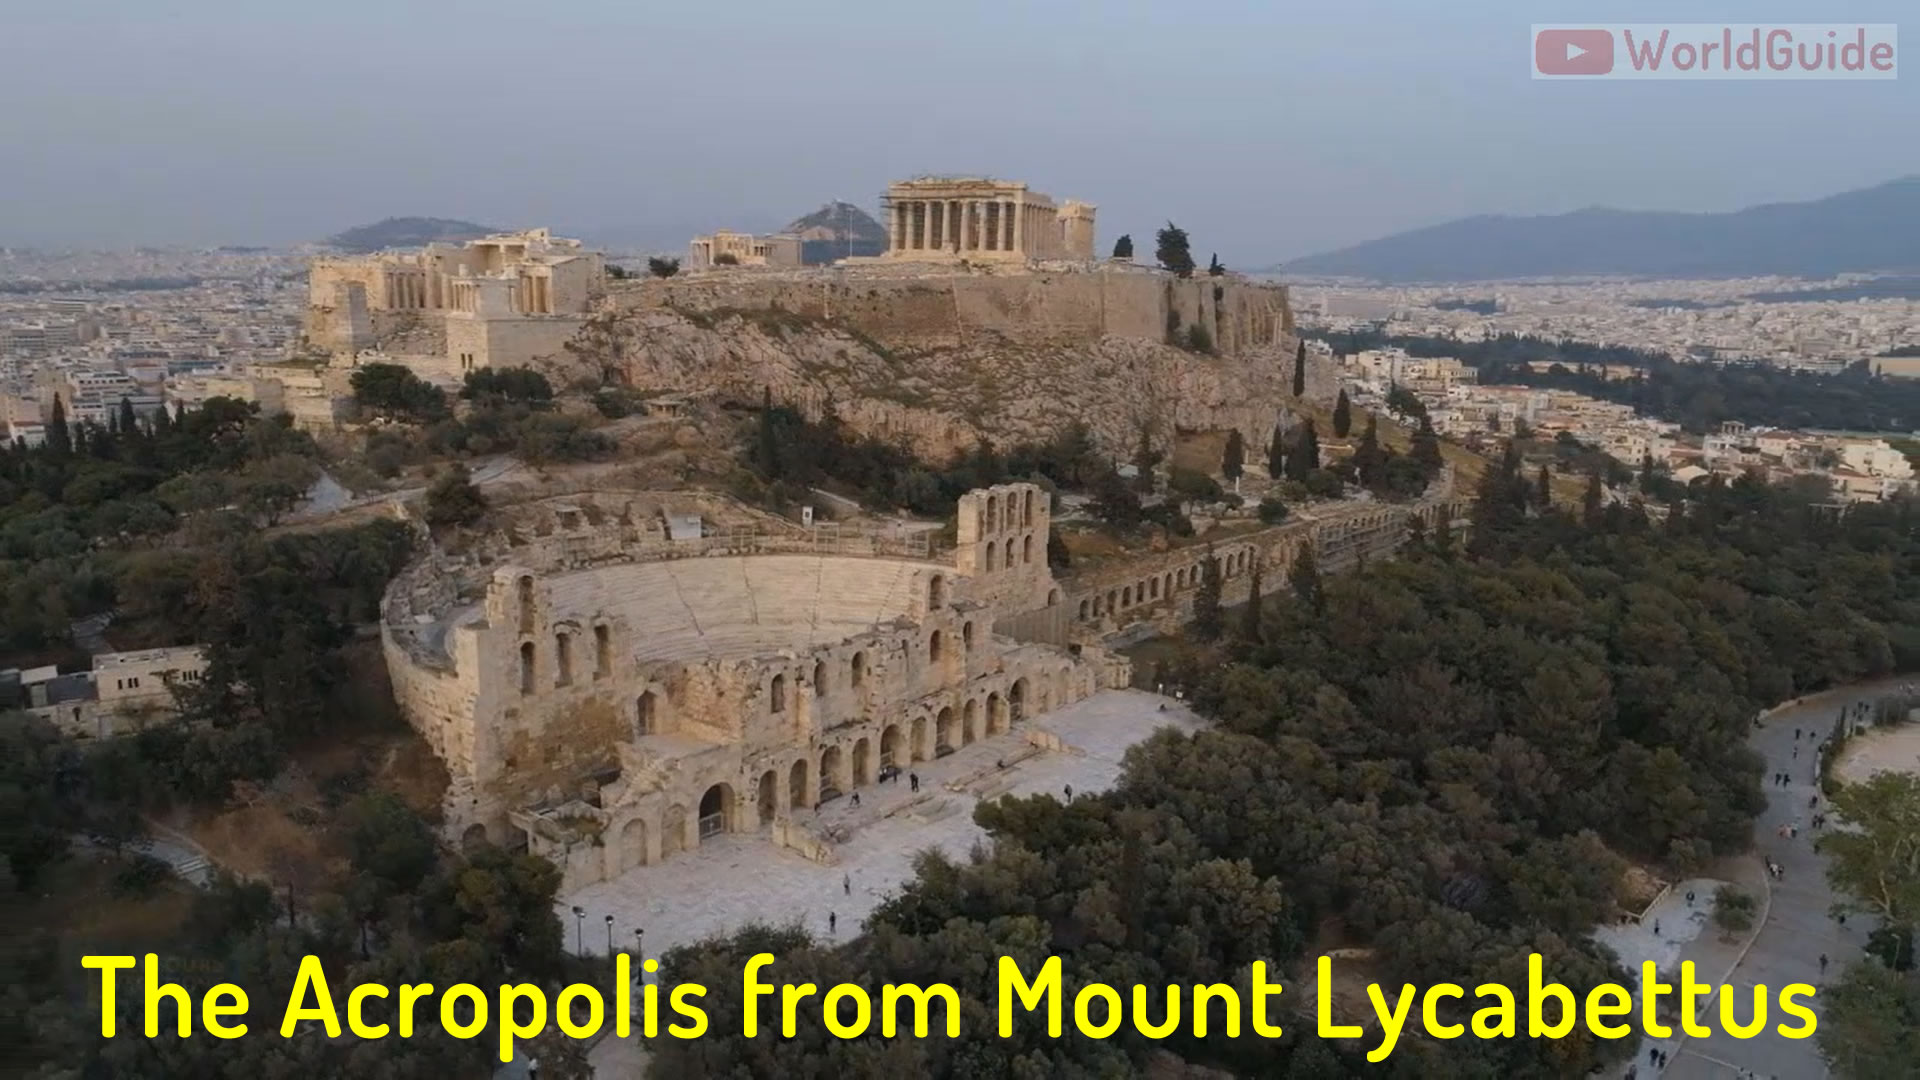 Acropoli from Mount Lycabettus